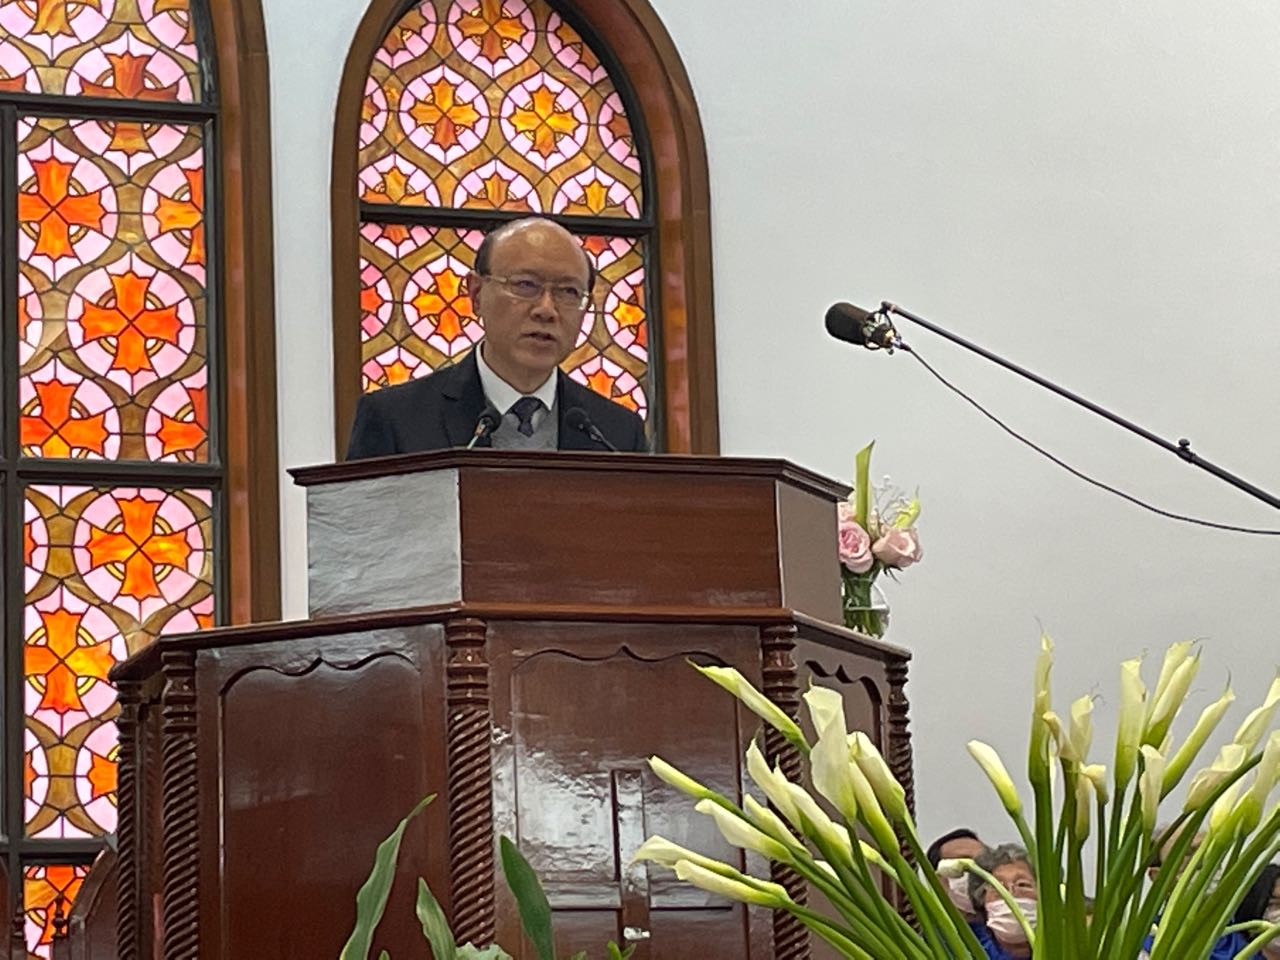 Elder Ou Enlin from Shanghai Grace Church shared on the topic of perfume and cross in a sermon on the afternoon of Good Friday, April 2, 2021.